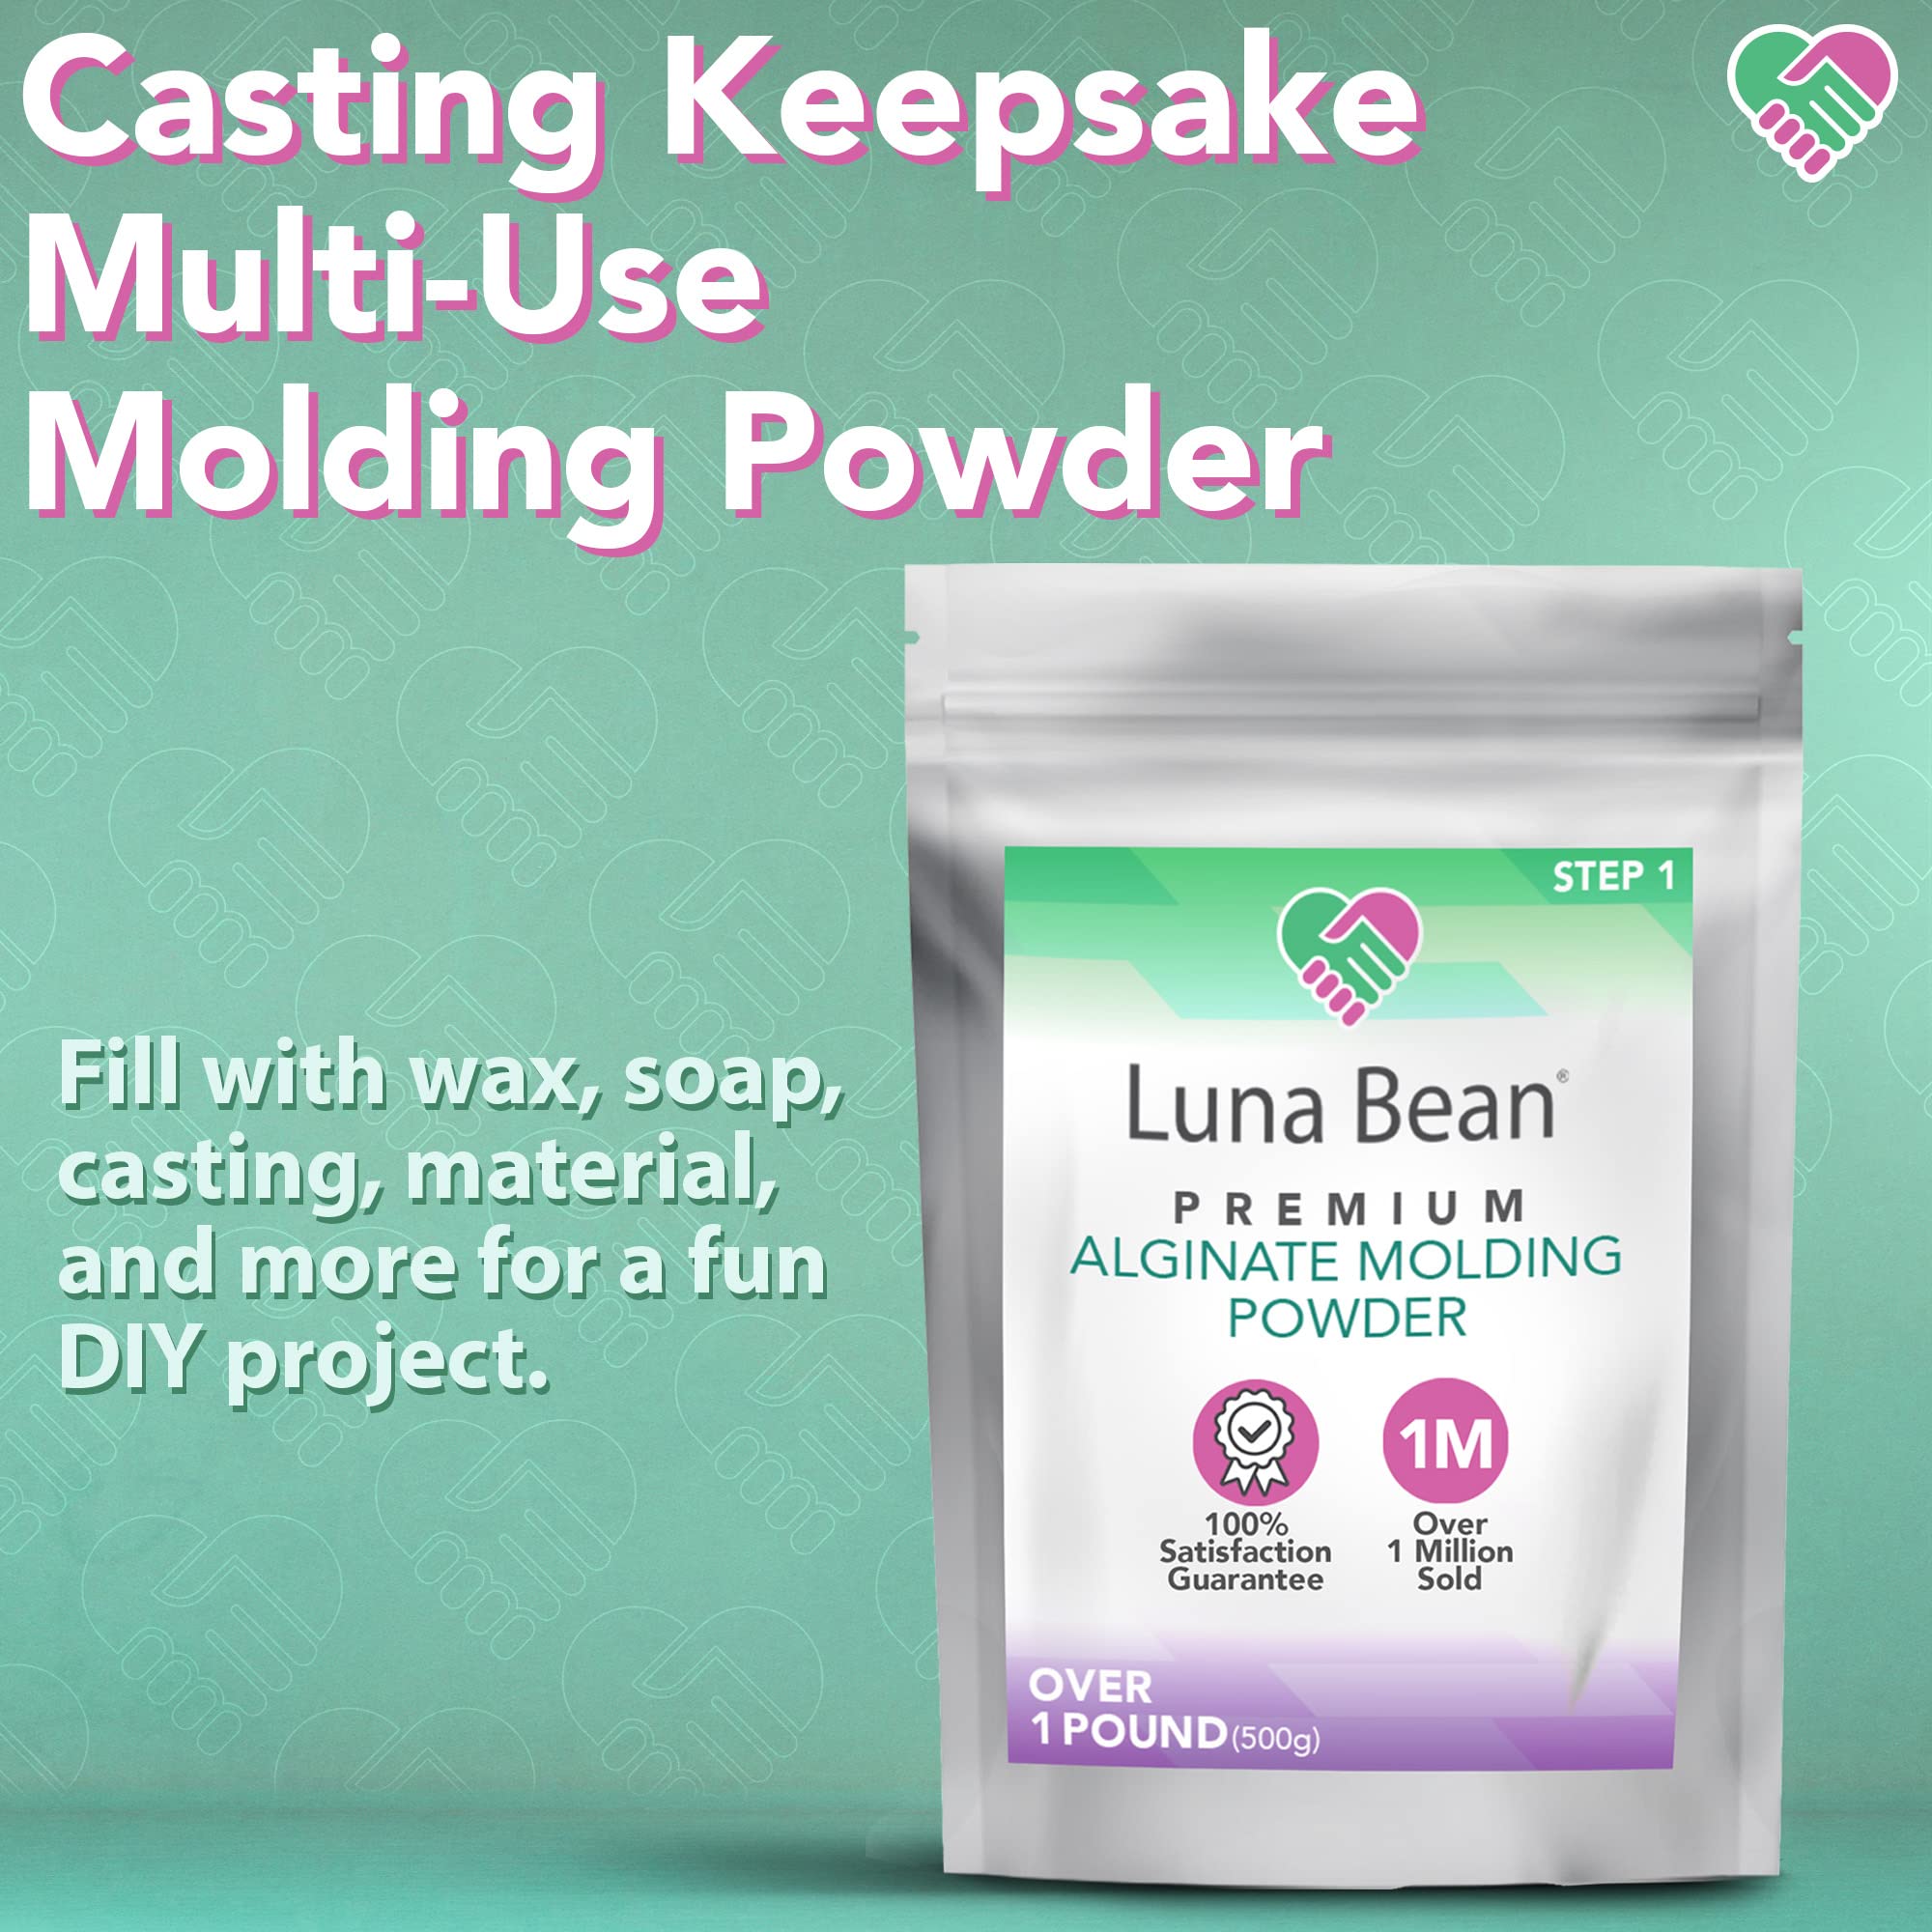 Alginate Molding Powder for Hand Casting Kit & Multi-use Projects 3 Lb  Casting Plaster Material -  Norway